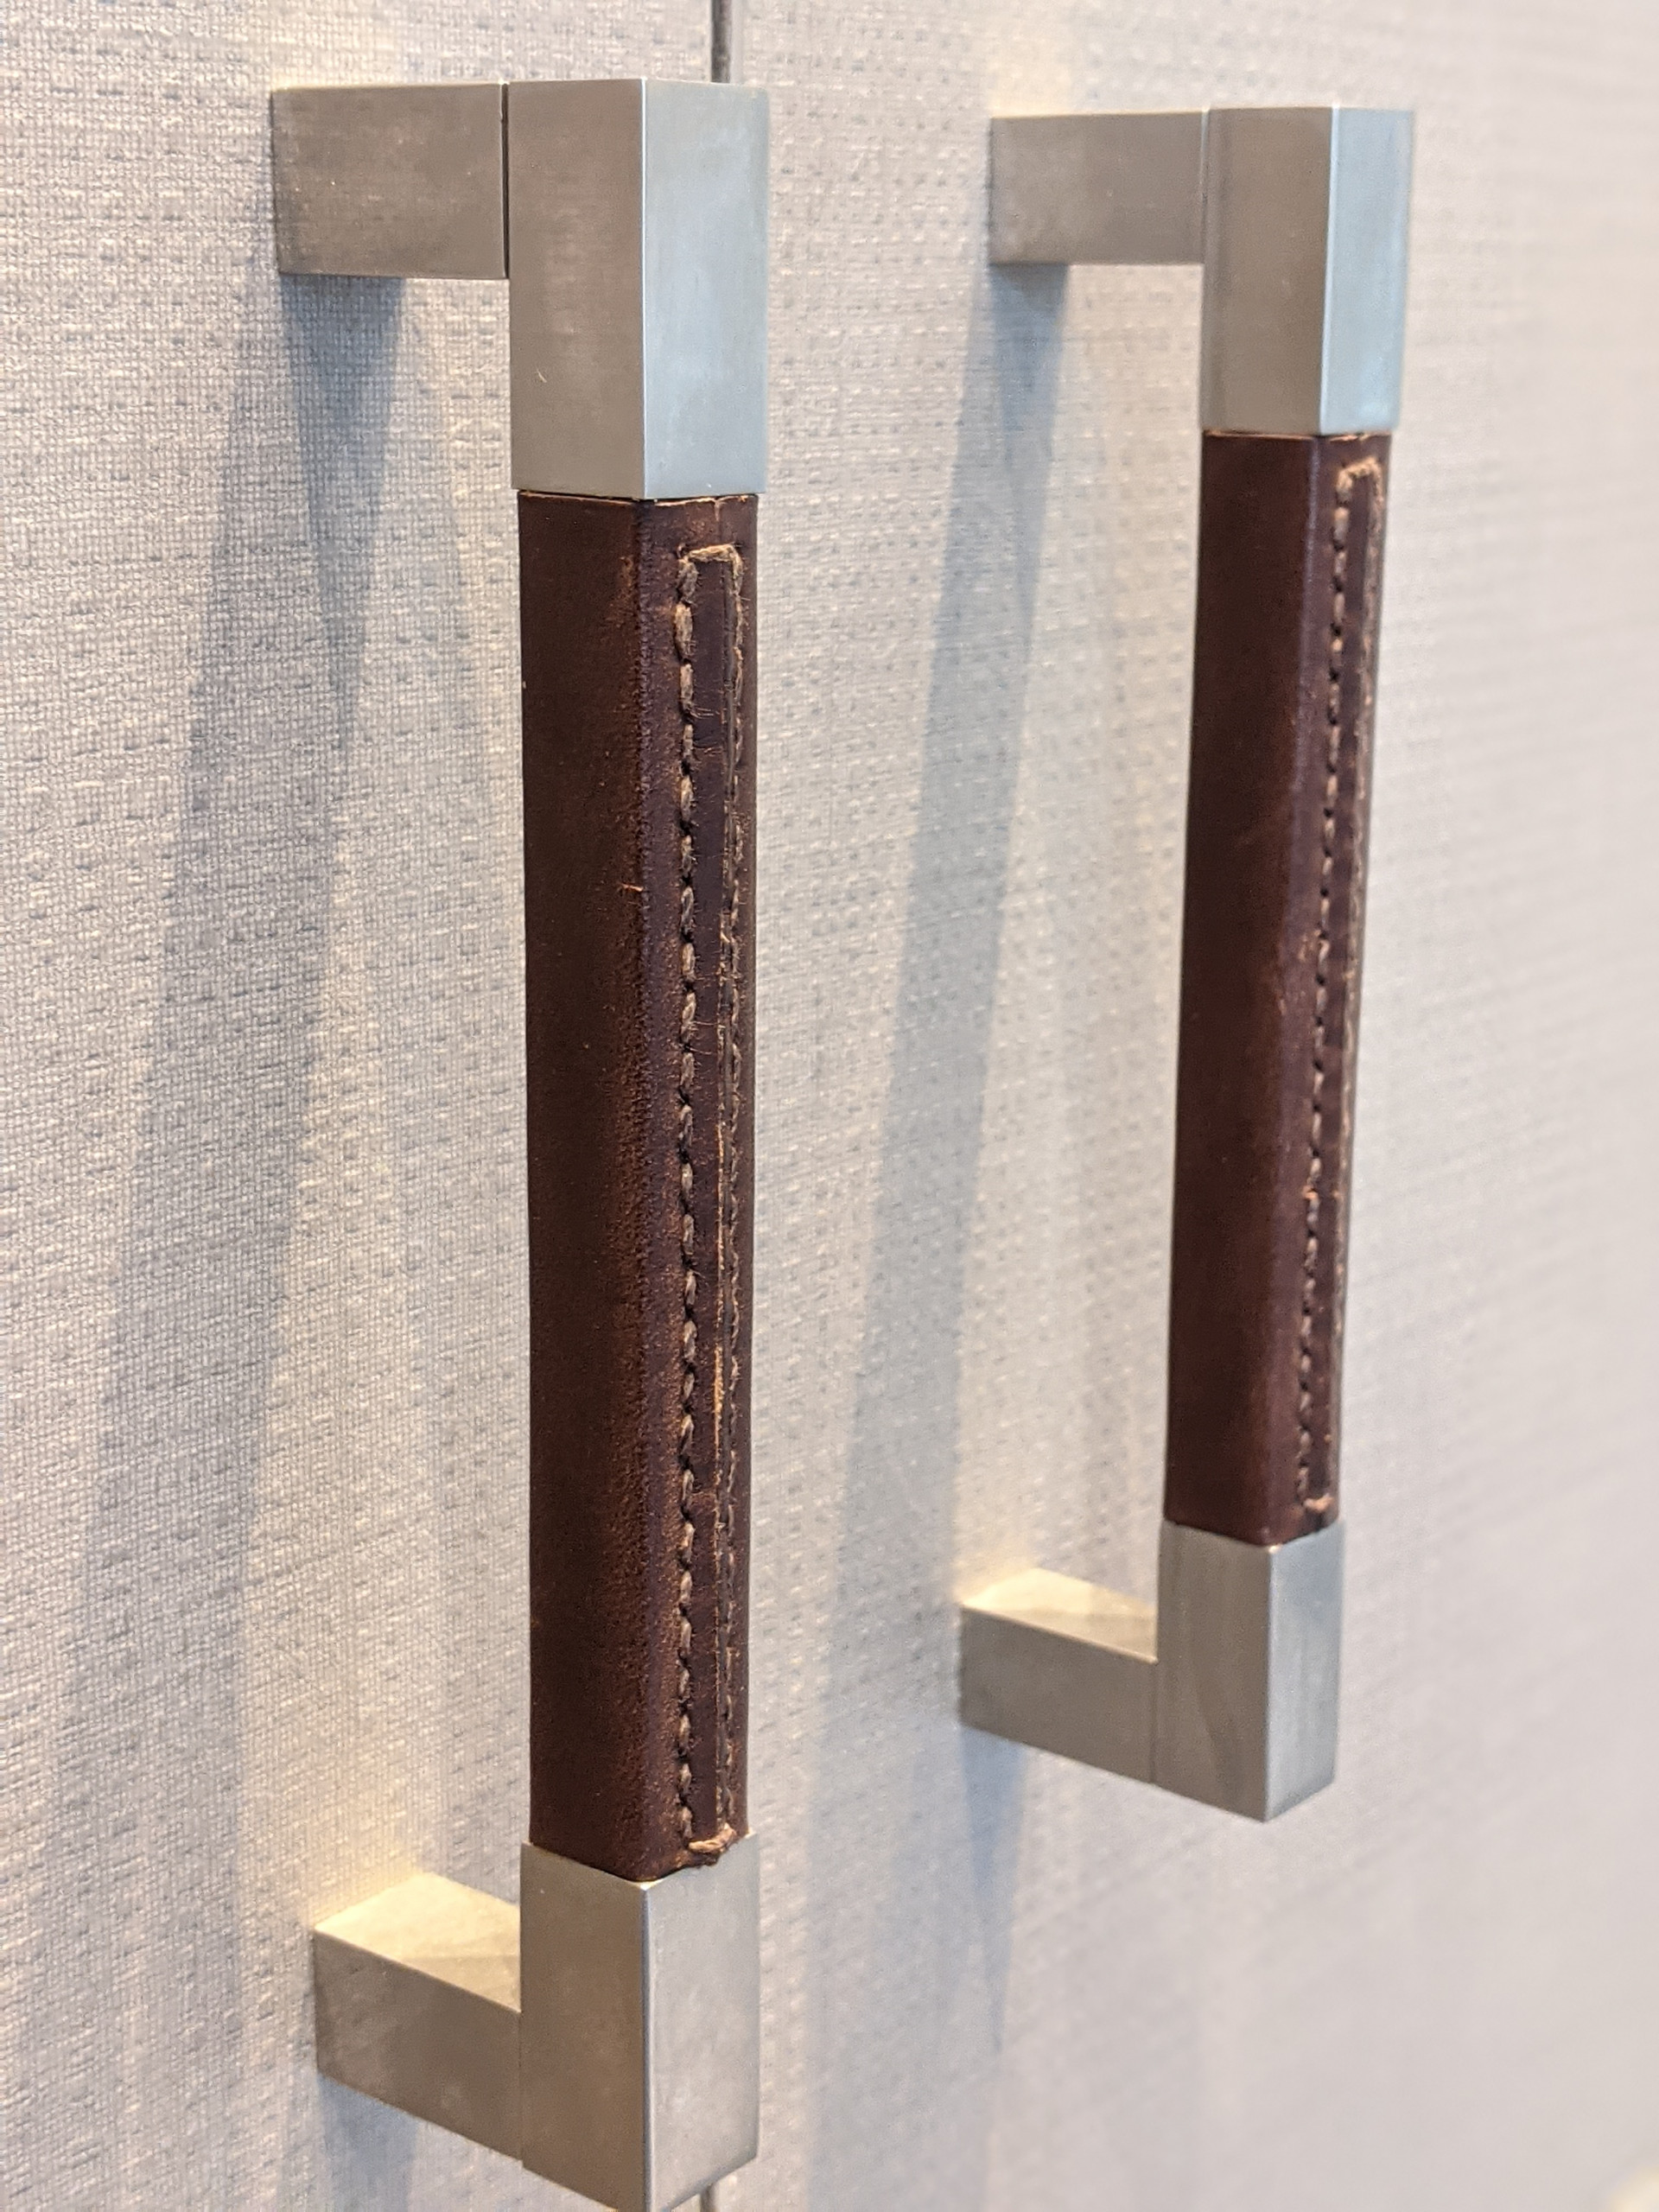 Turnstyle Design Handles with stiched out leather